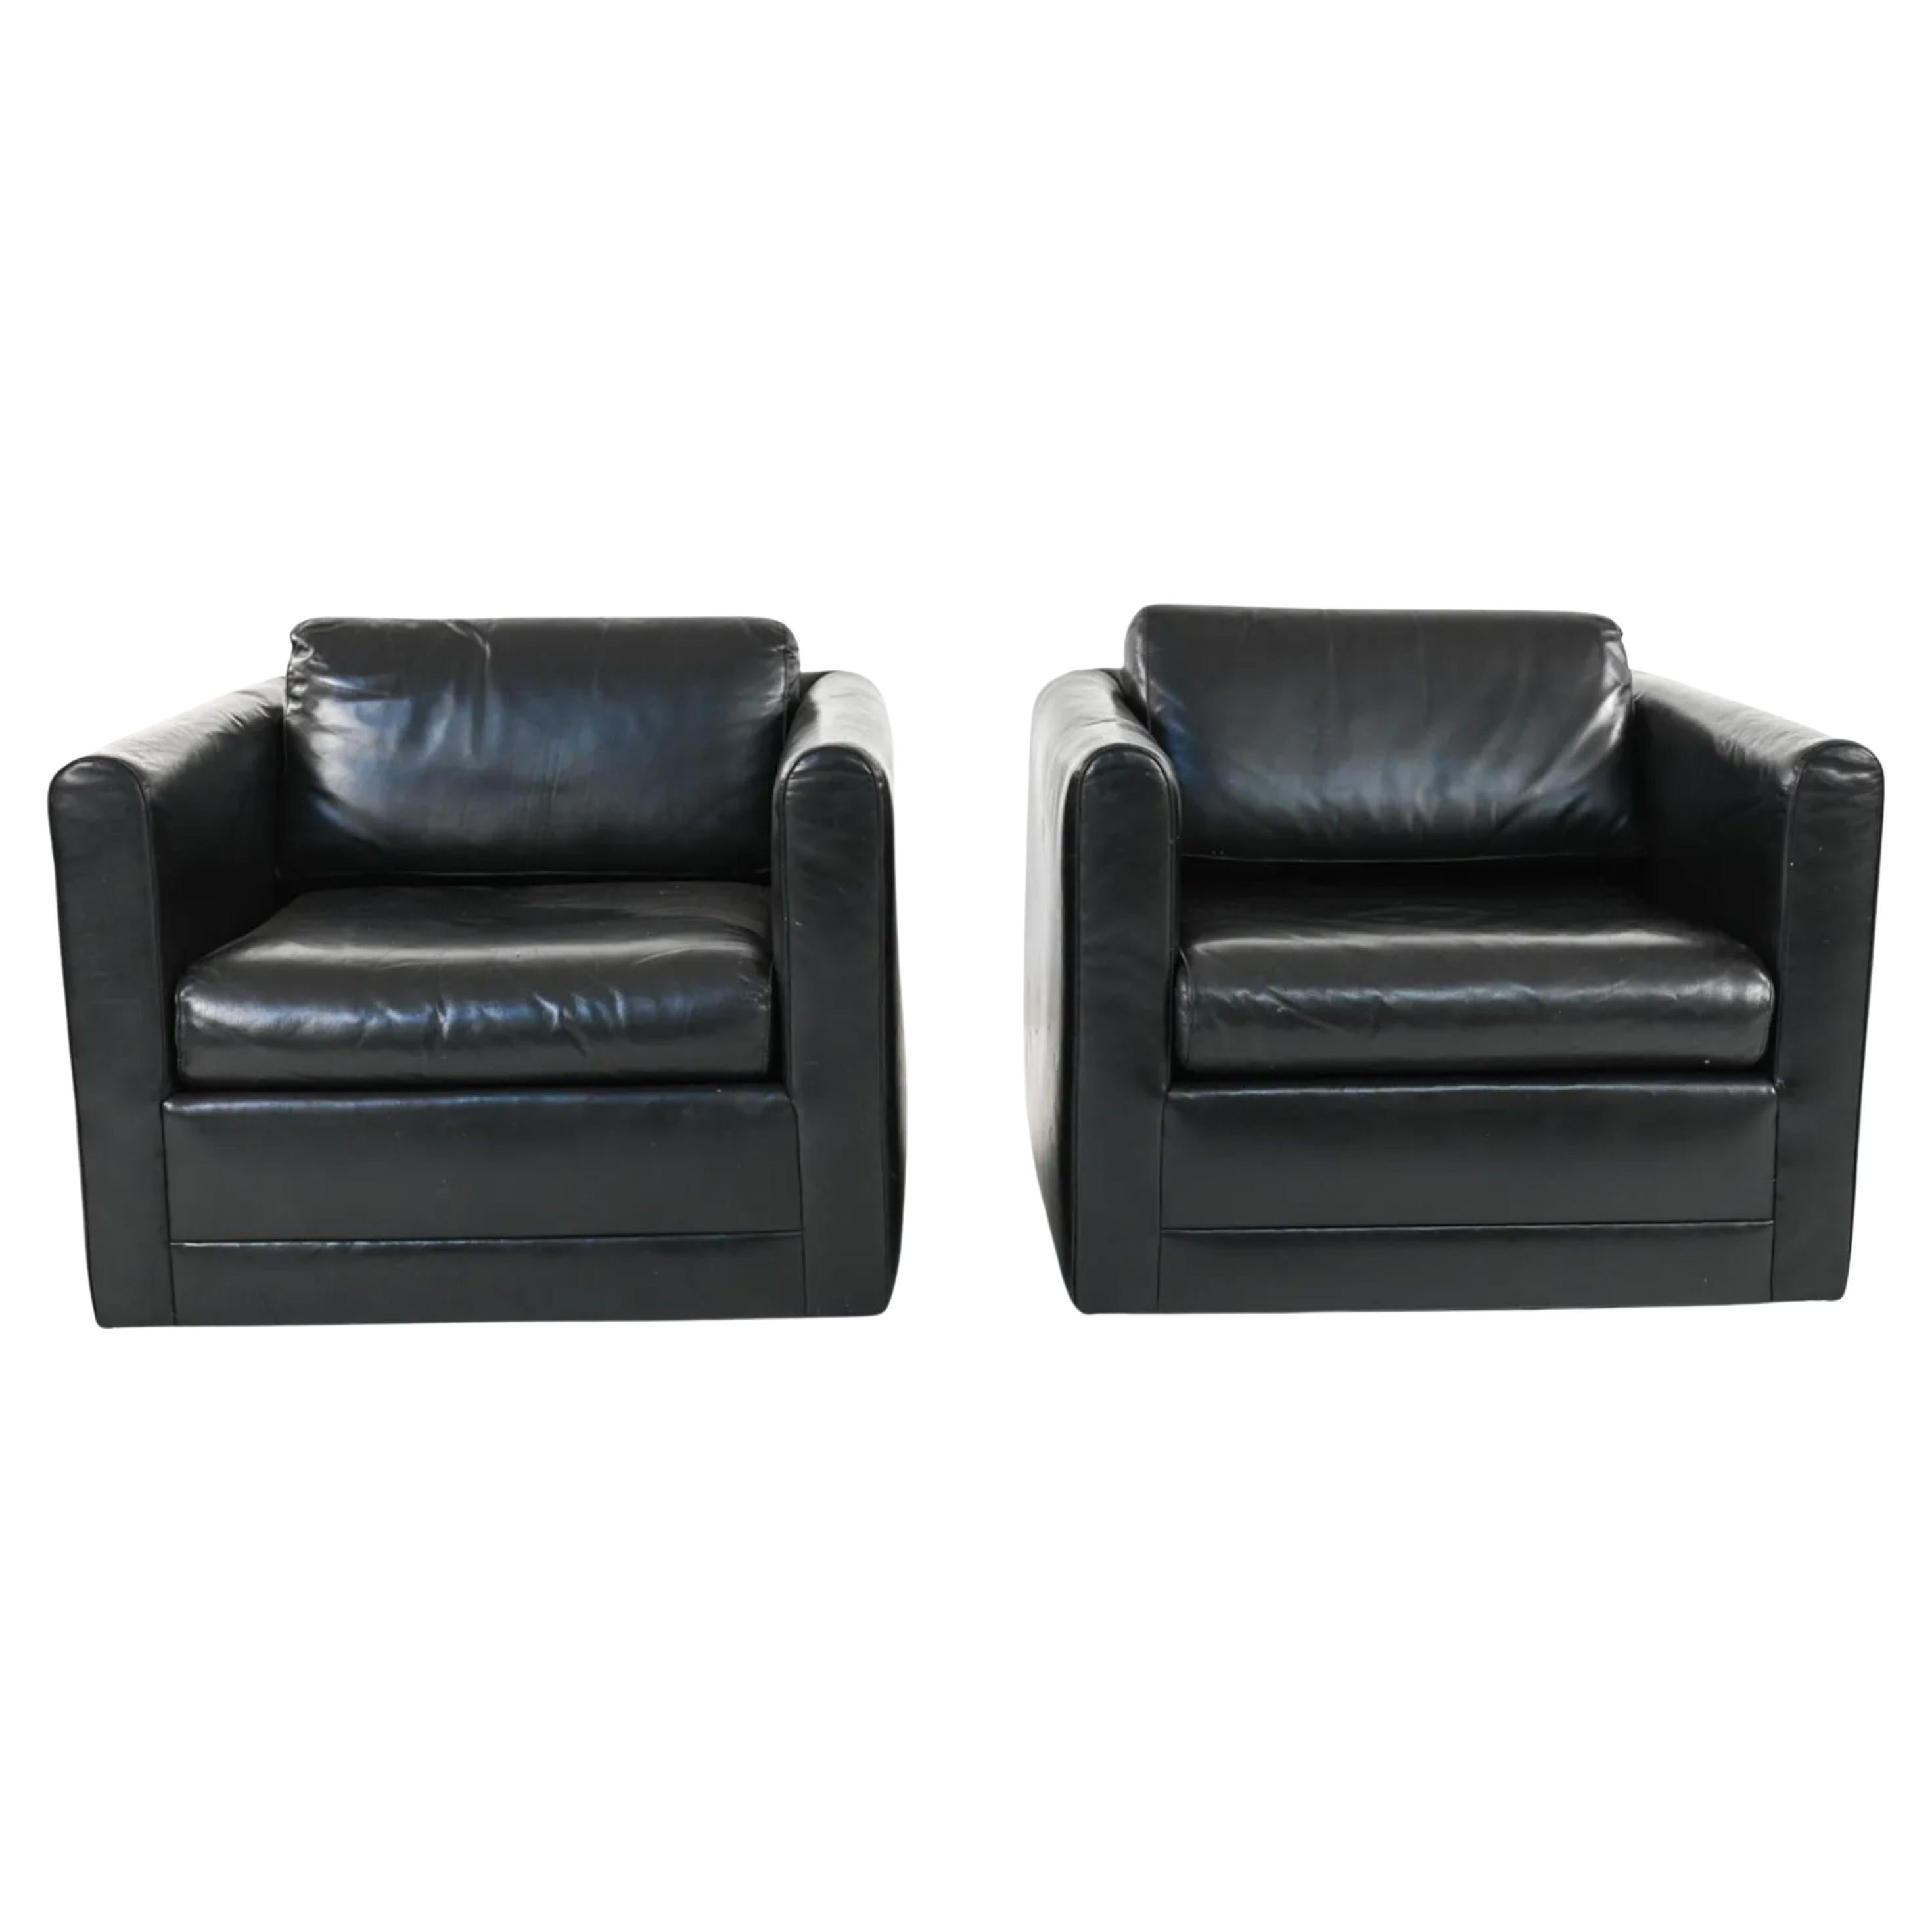 Mid-Century Modern Style Cube Lounge Club Chairs by in Black Leather